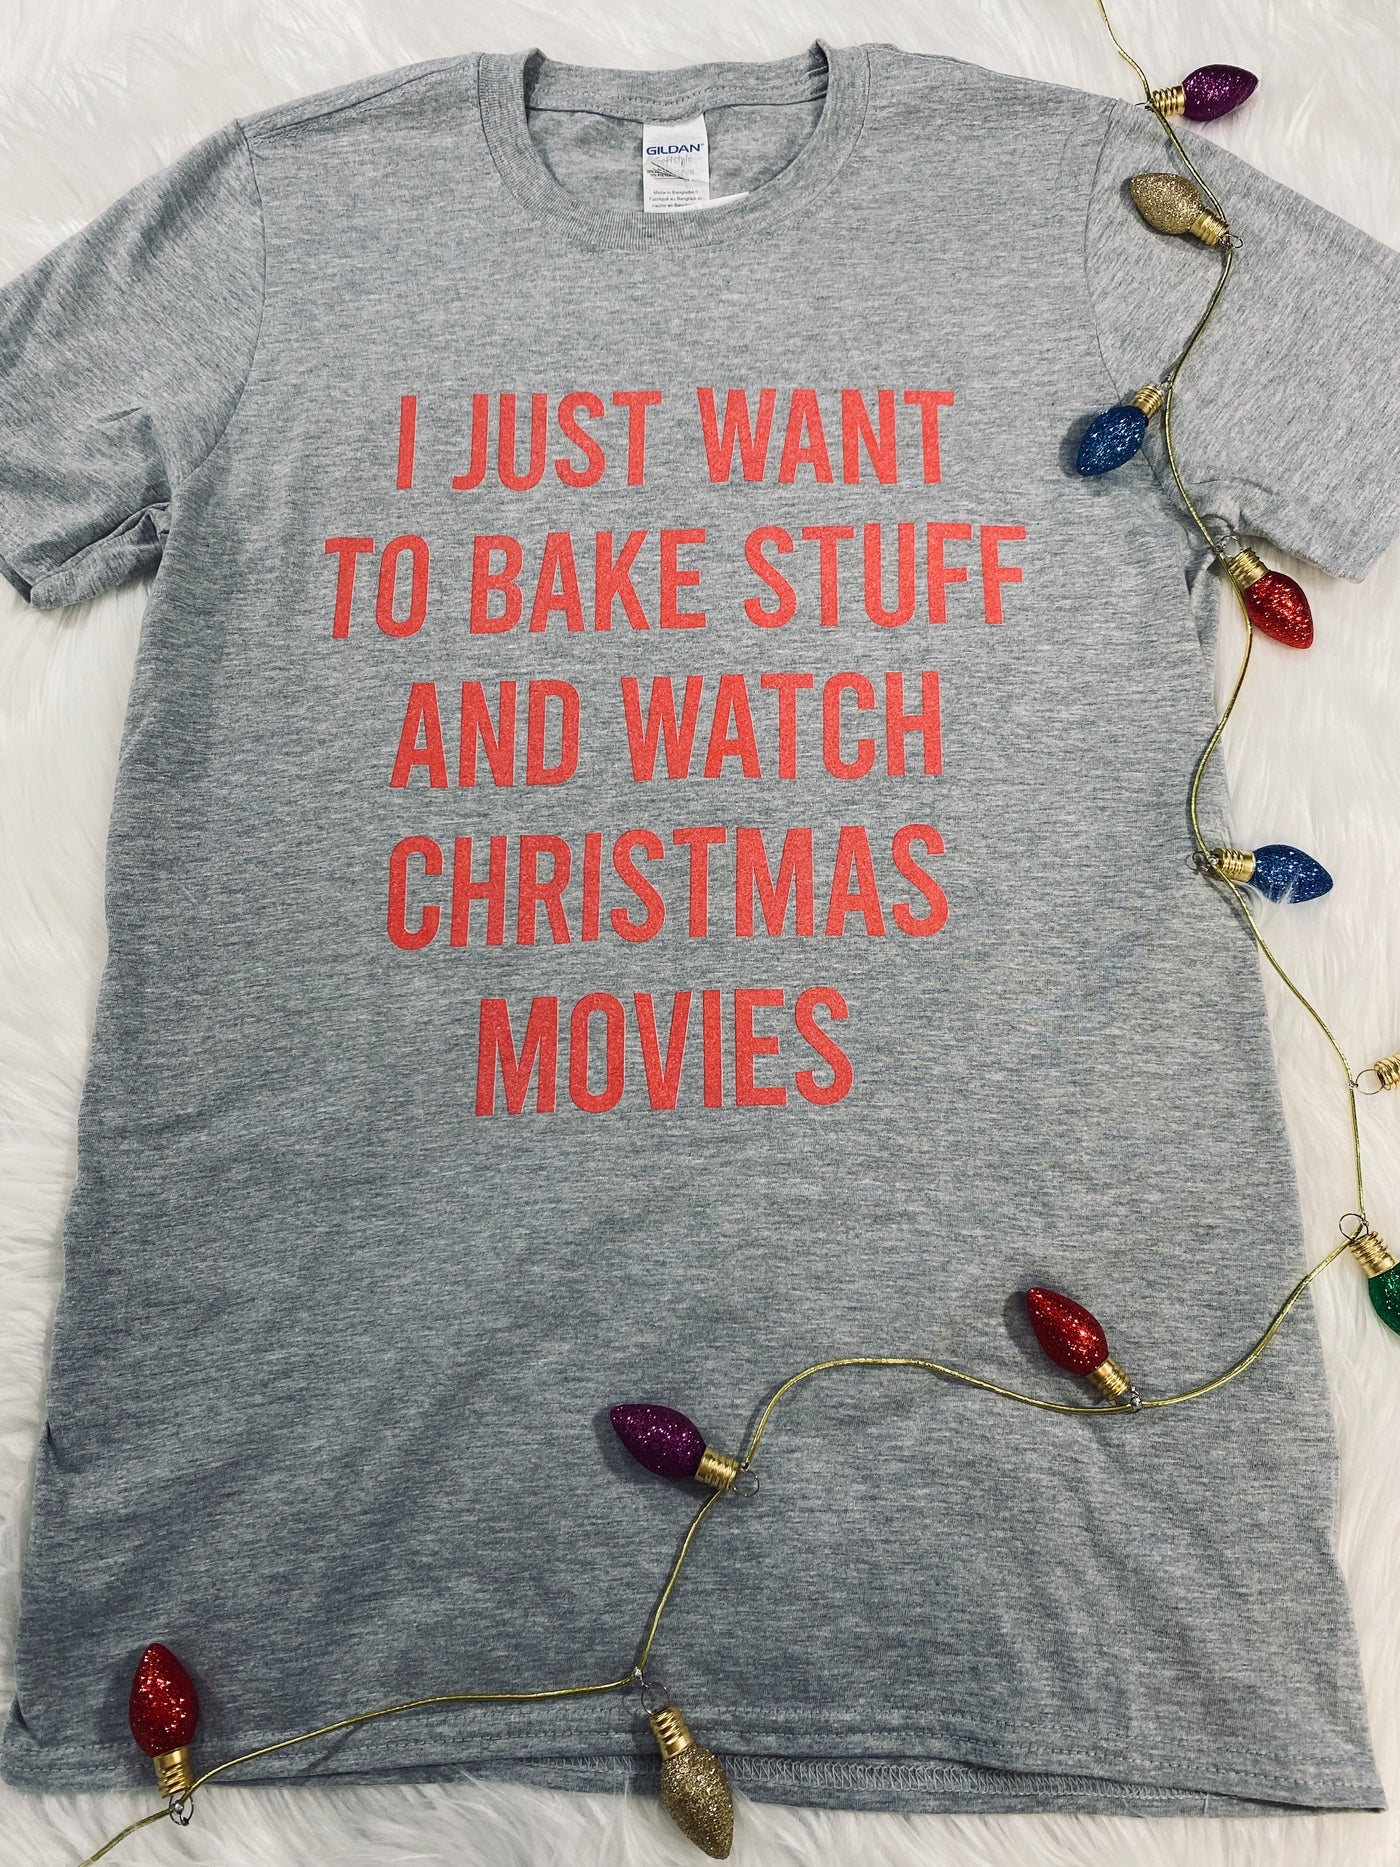 Daydream Tees Bake Stuff And Watch Christmas Movies Sport Grey